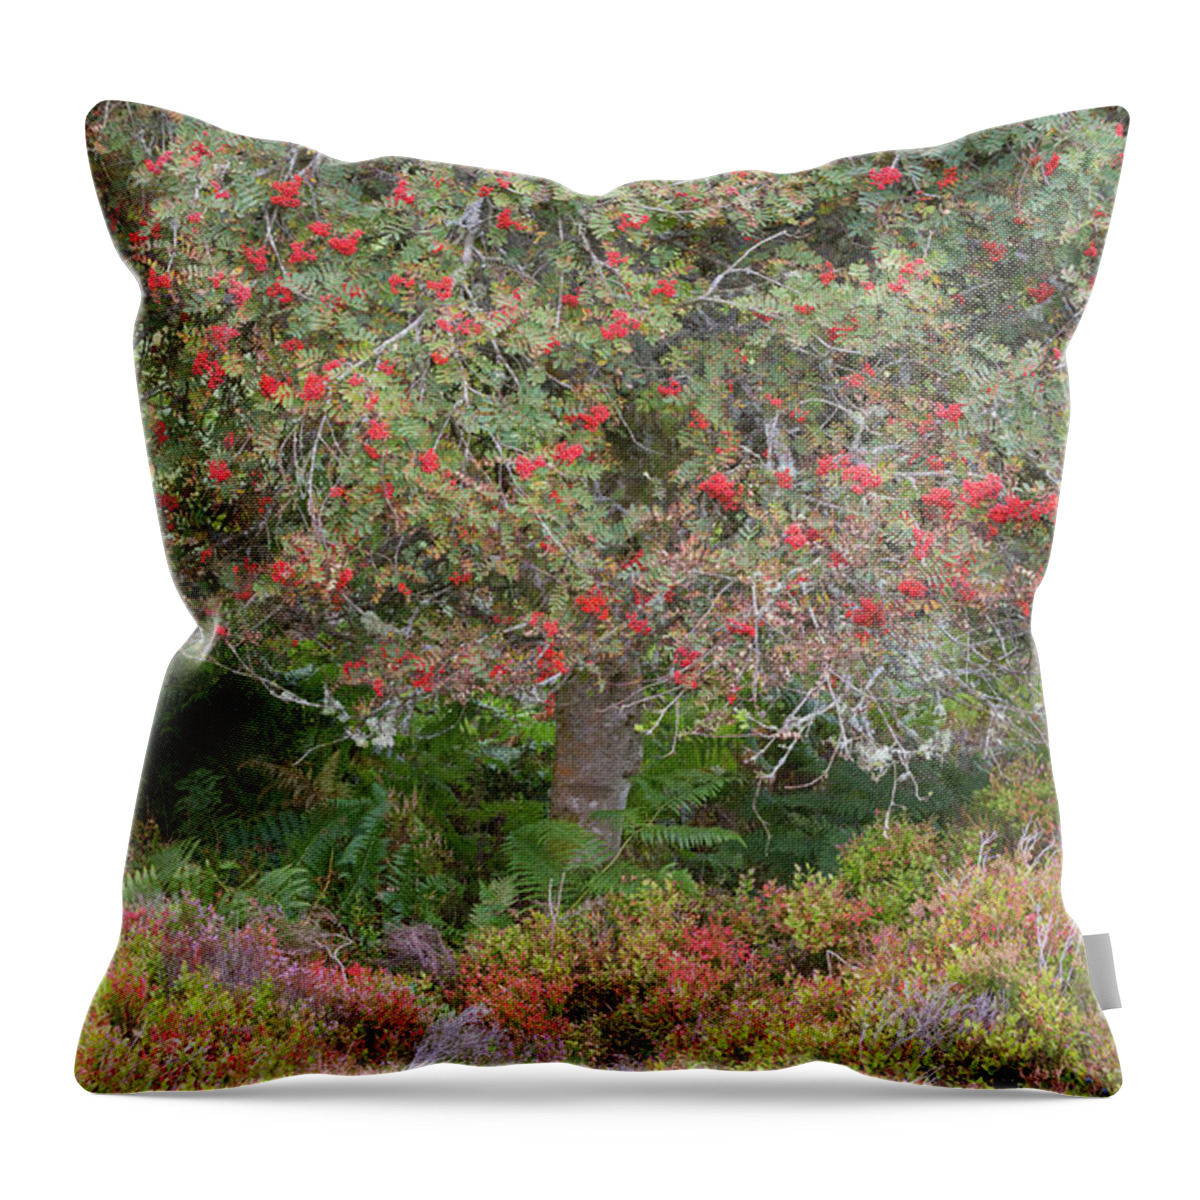 Landscape - Scenery Throw Pillow featuring the photograph Rowan Tree, Bilberries and Heather by Anita Nicholson